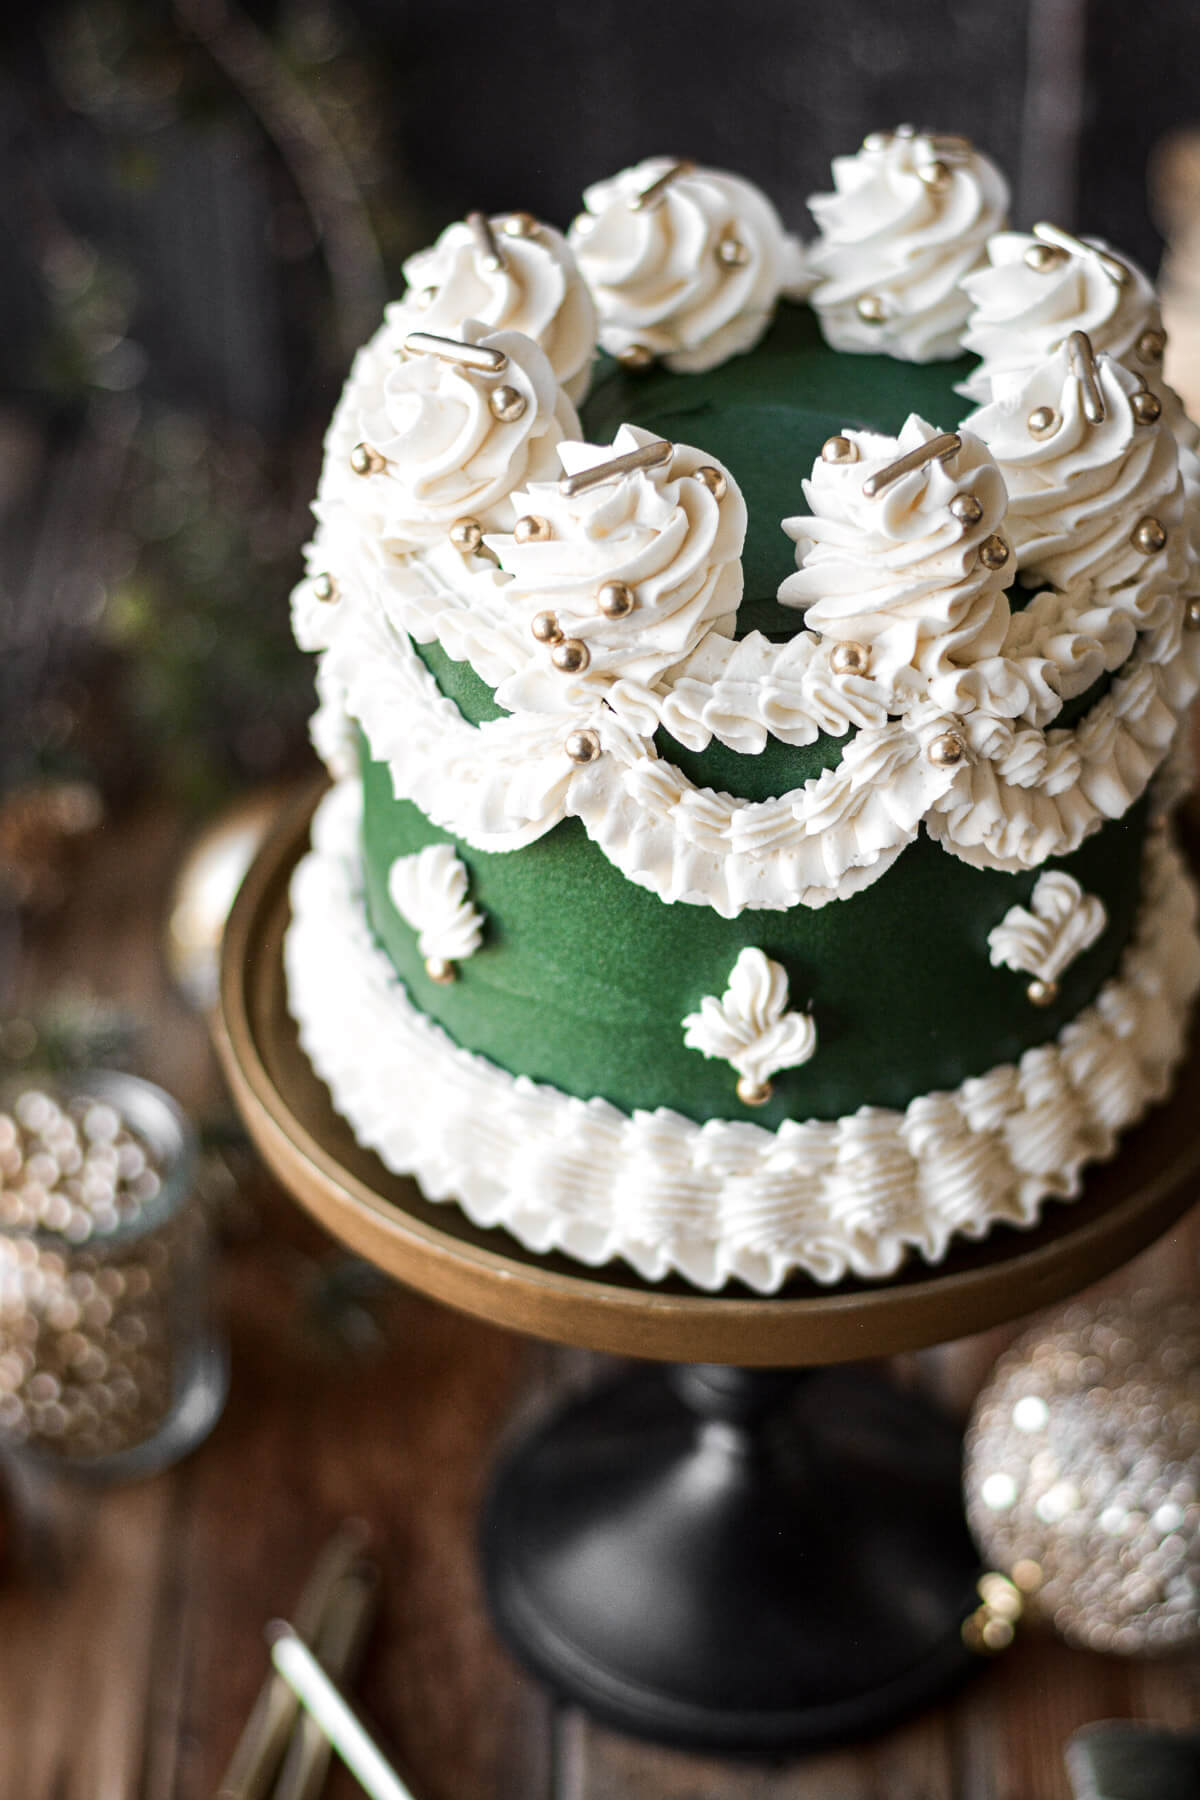 Green and white Lambeth cake with gold dragees for Christmas.